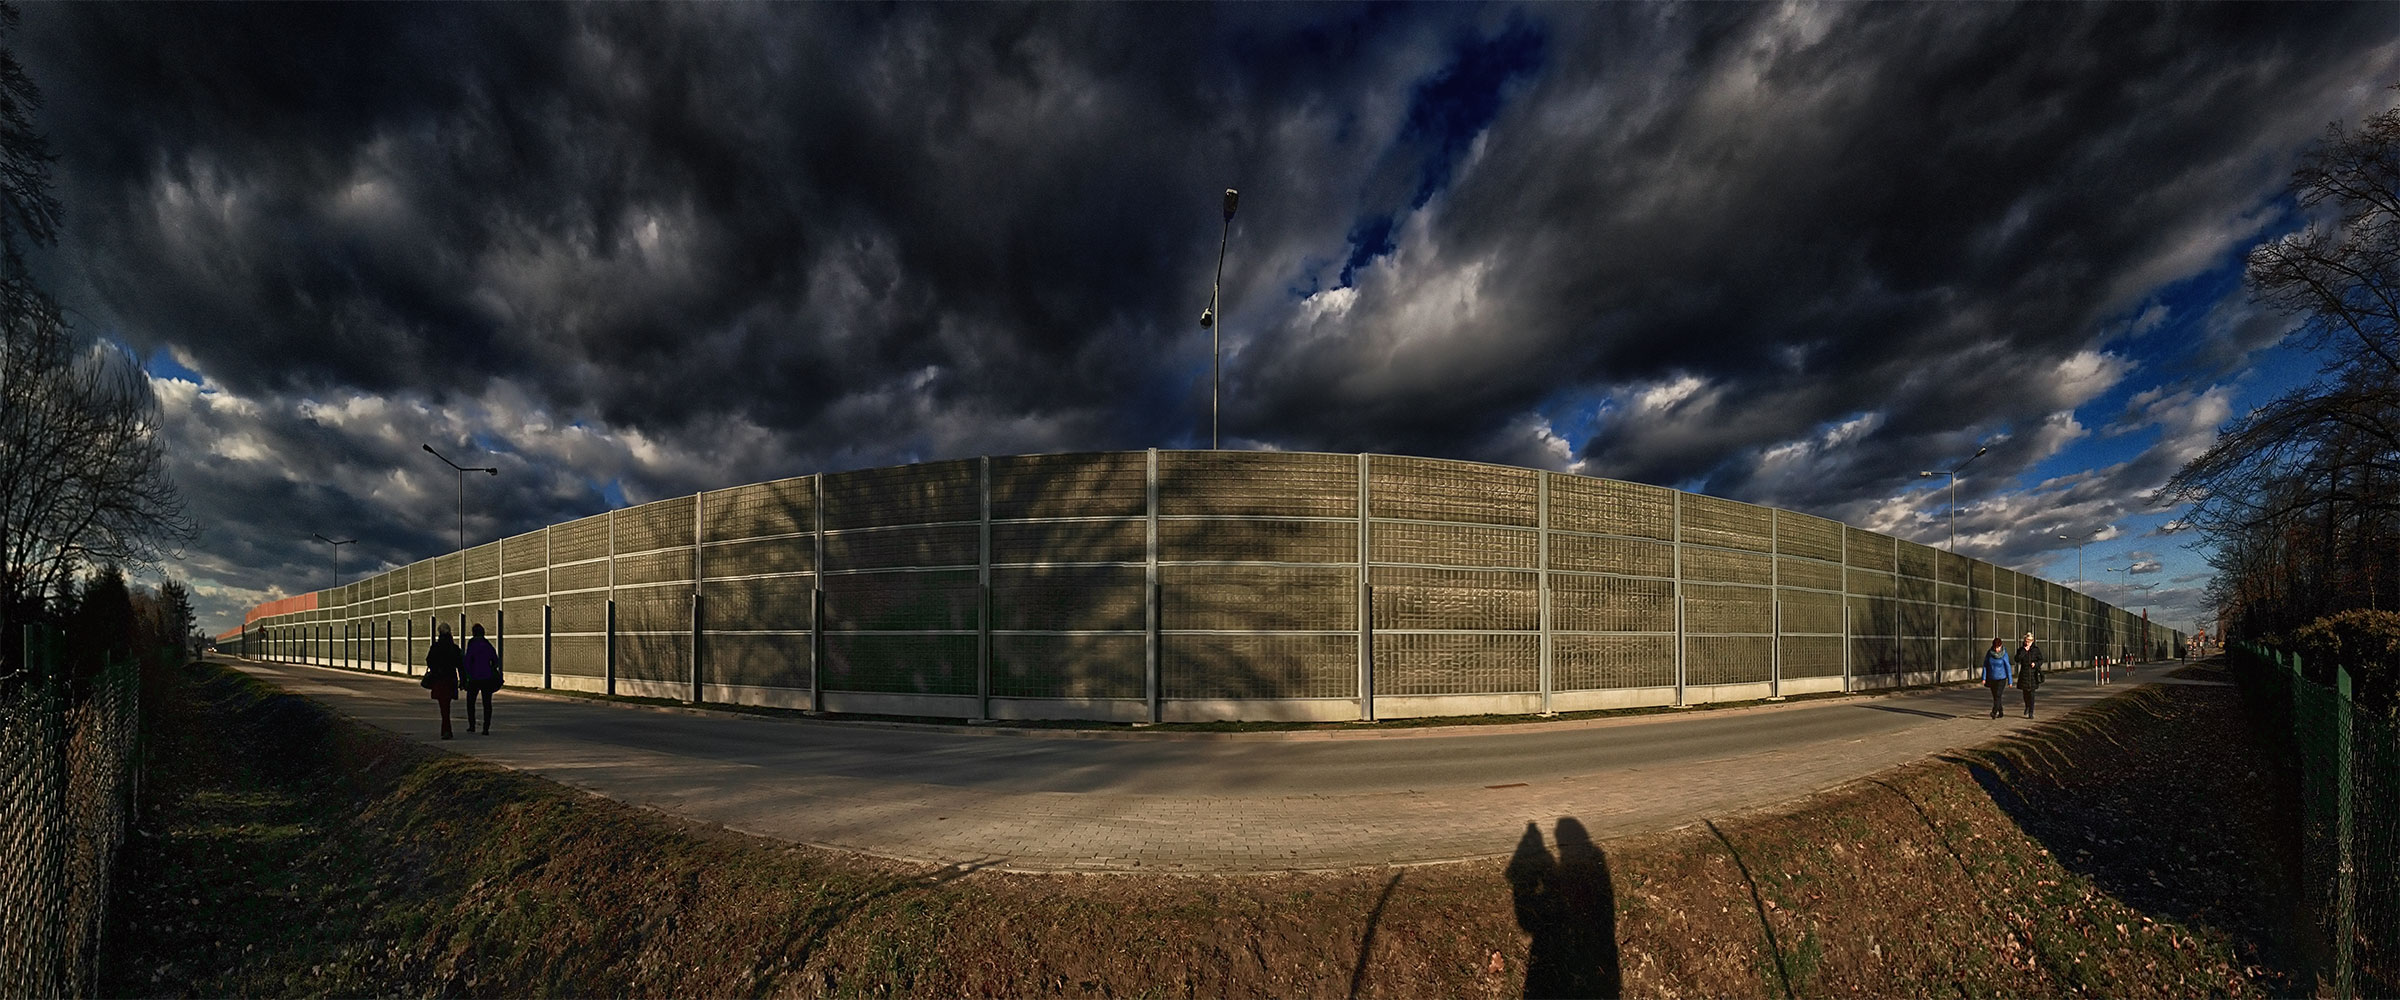 PANORAMA DIARY | Iphoneography blog | Road acoustic fence